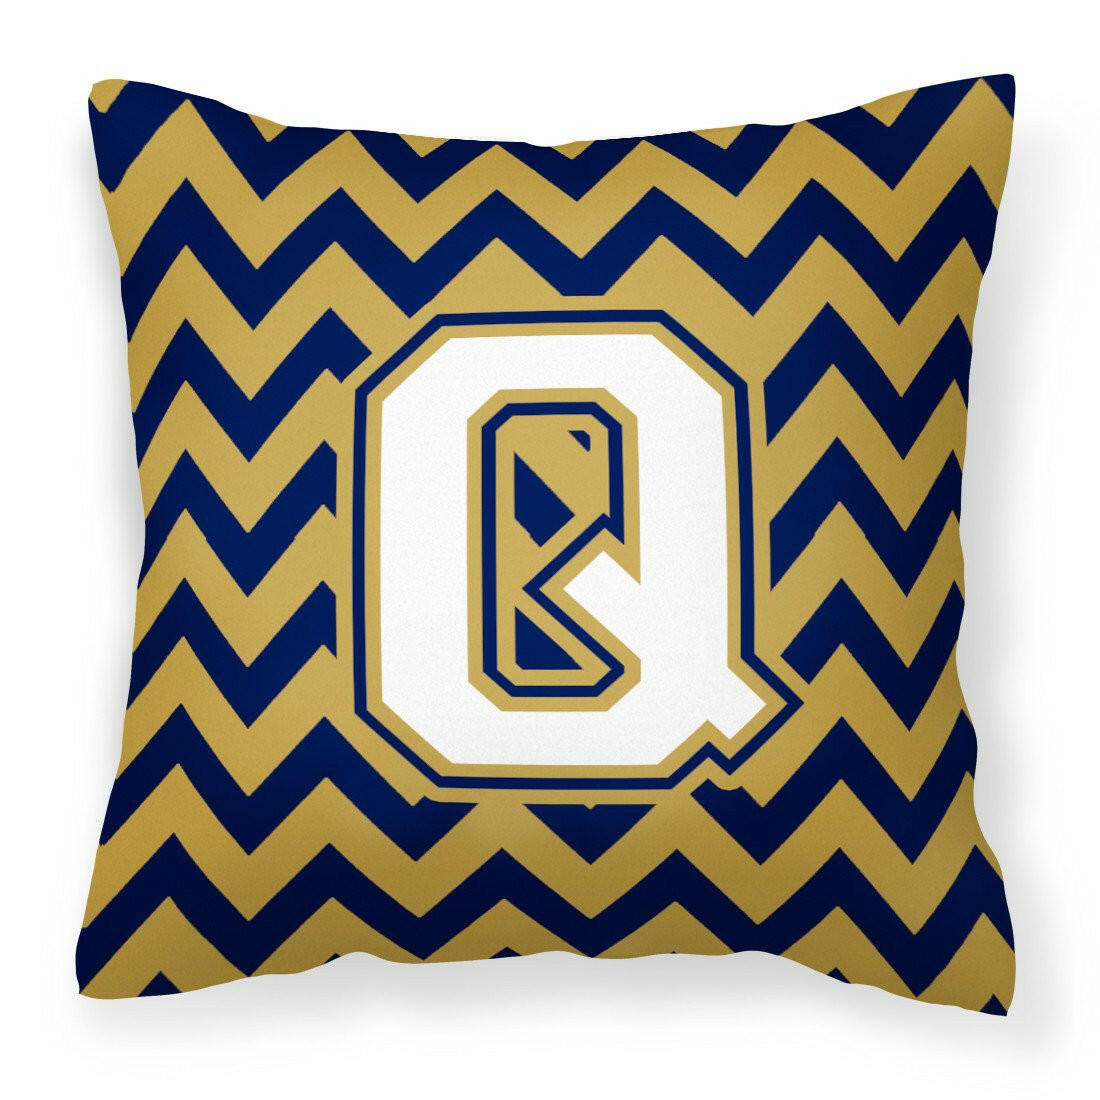 Letter Q Chevron Navy Blue and Gold Fabric Decorative Pillow CJ1057-QPW1414 by Caroline's Treasures